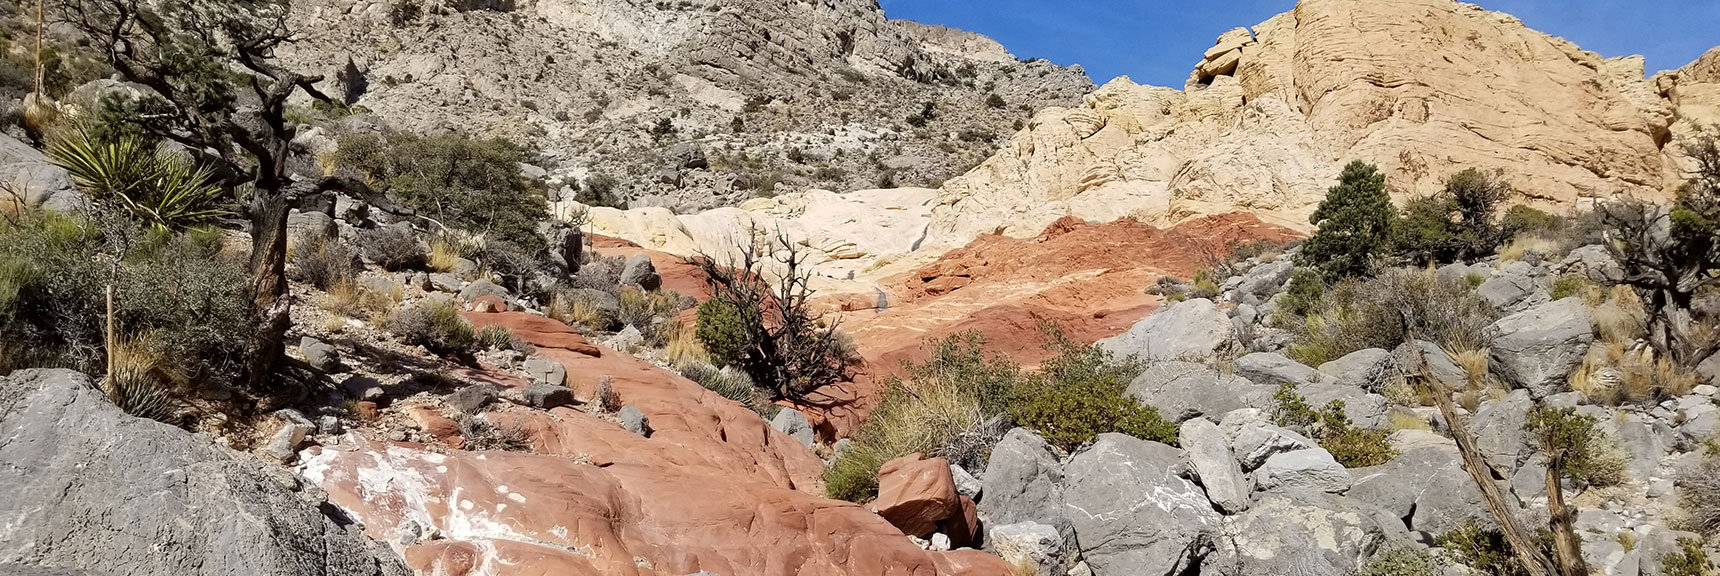 Artistic Placement of Dunes, Rocks and Plant Life | Kraft Mountain, Gateway Canyon Loop, Calico Basin, Nevada